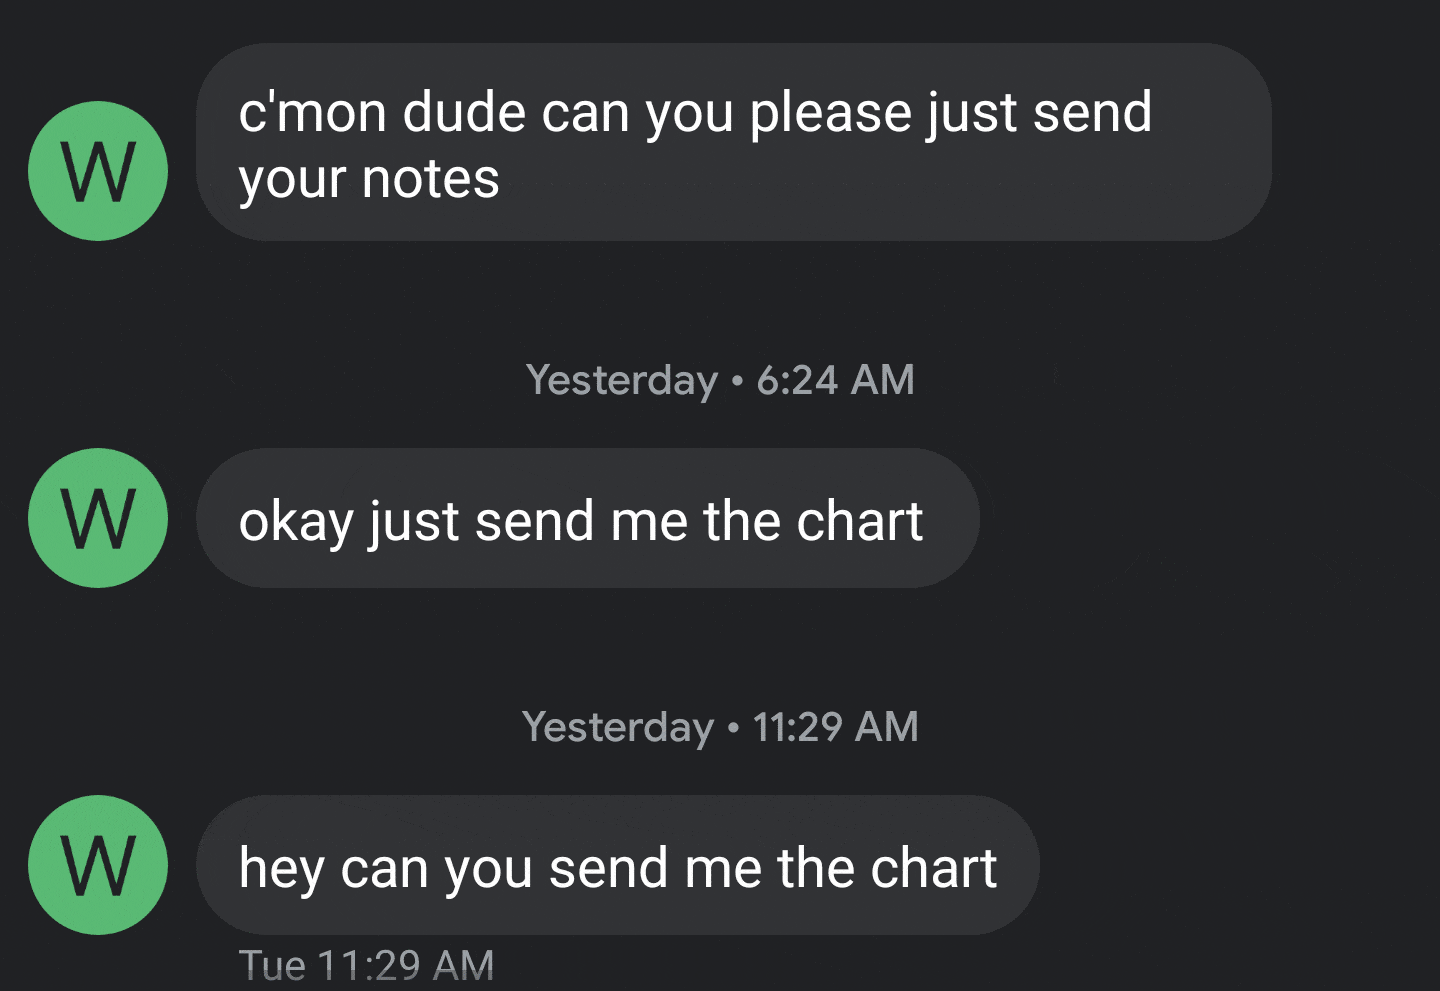 screenshot - W c'mon dude can you please just send your notes Yesterday W okay just send me the chart Yesterday W hey can you send me the chart Tue